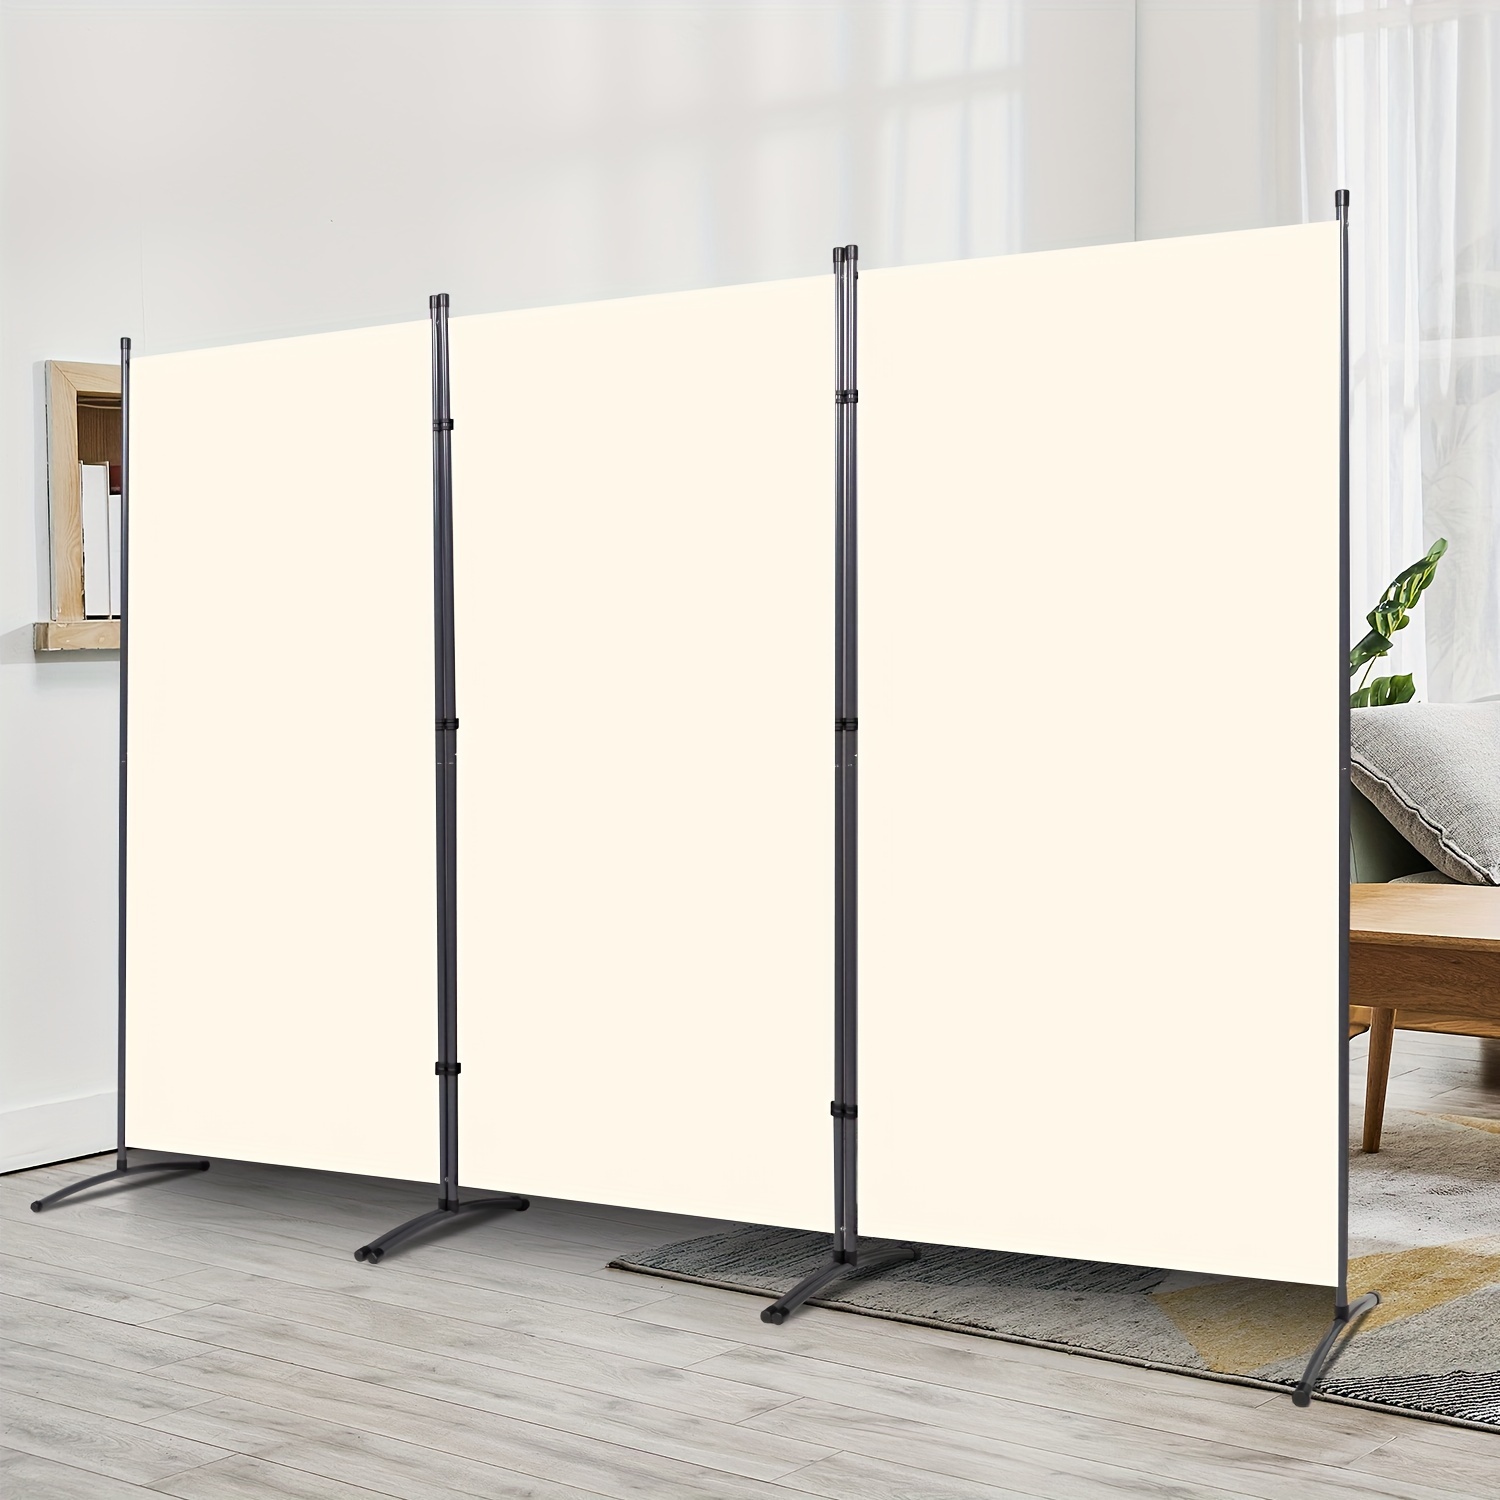 

Room Divider, Portable Office Divider Room Divider Wall Divider Screen 3 Panel, Folding Partition Privacy Screen Walls Dividers For Room Separator, Beige